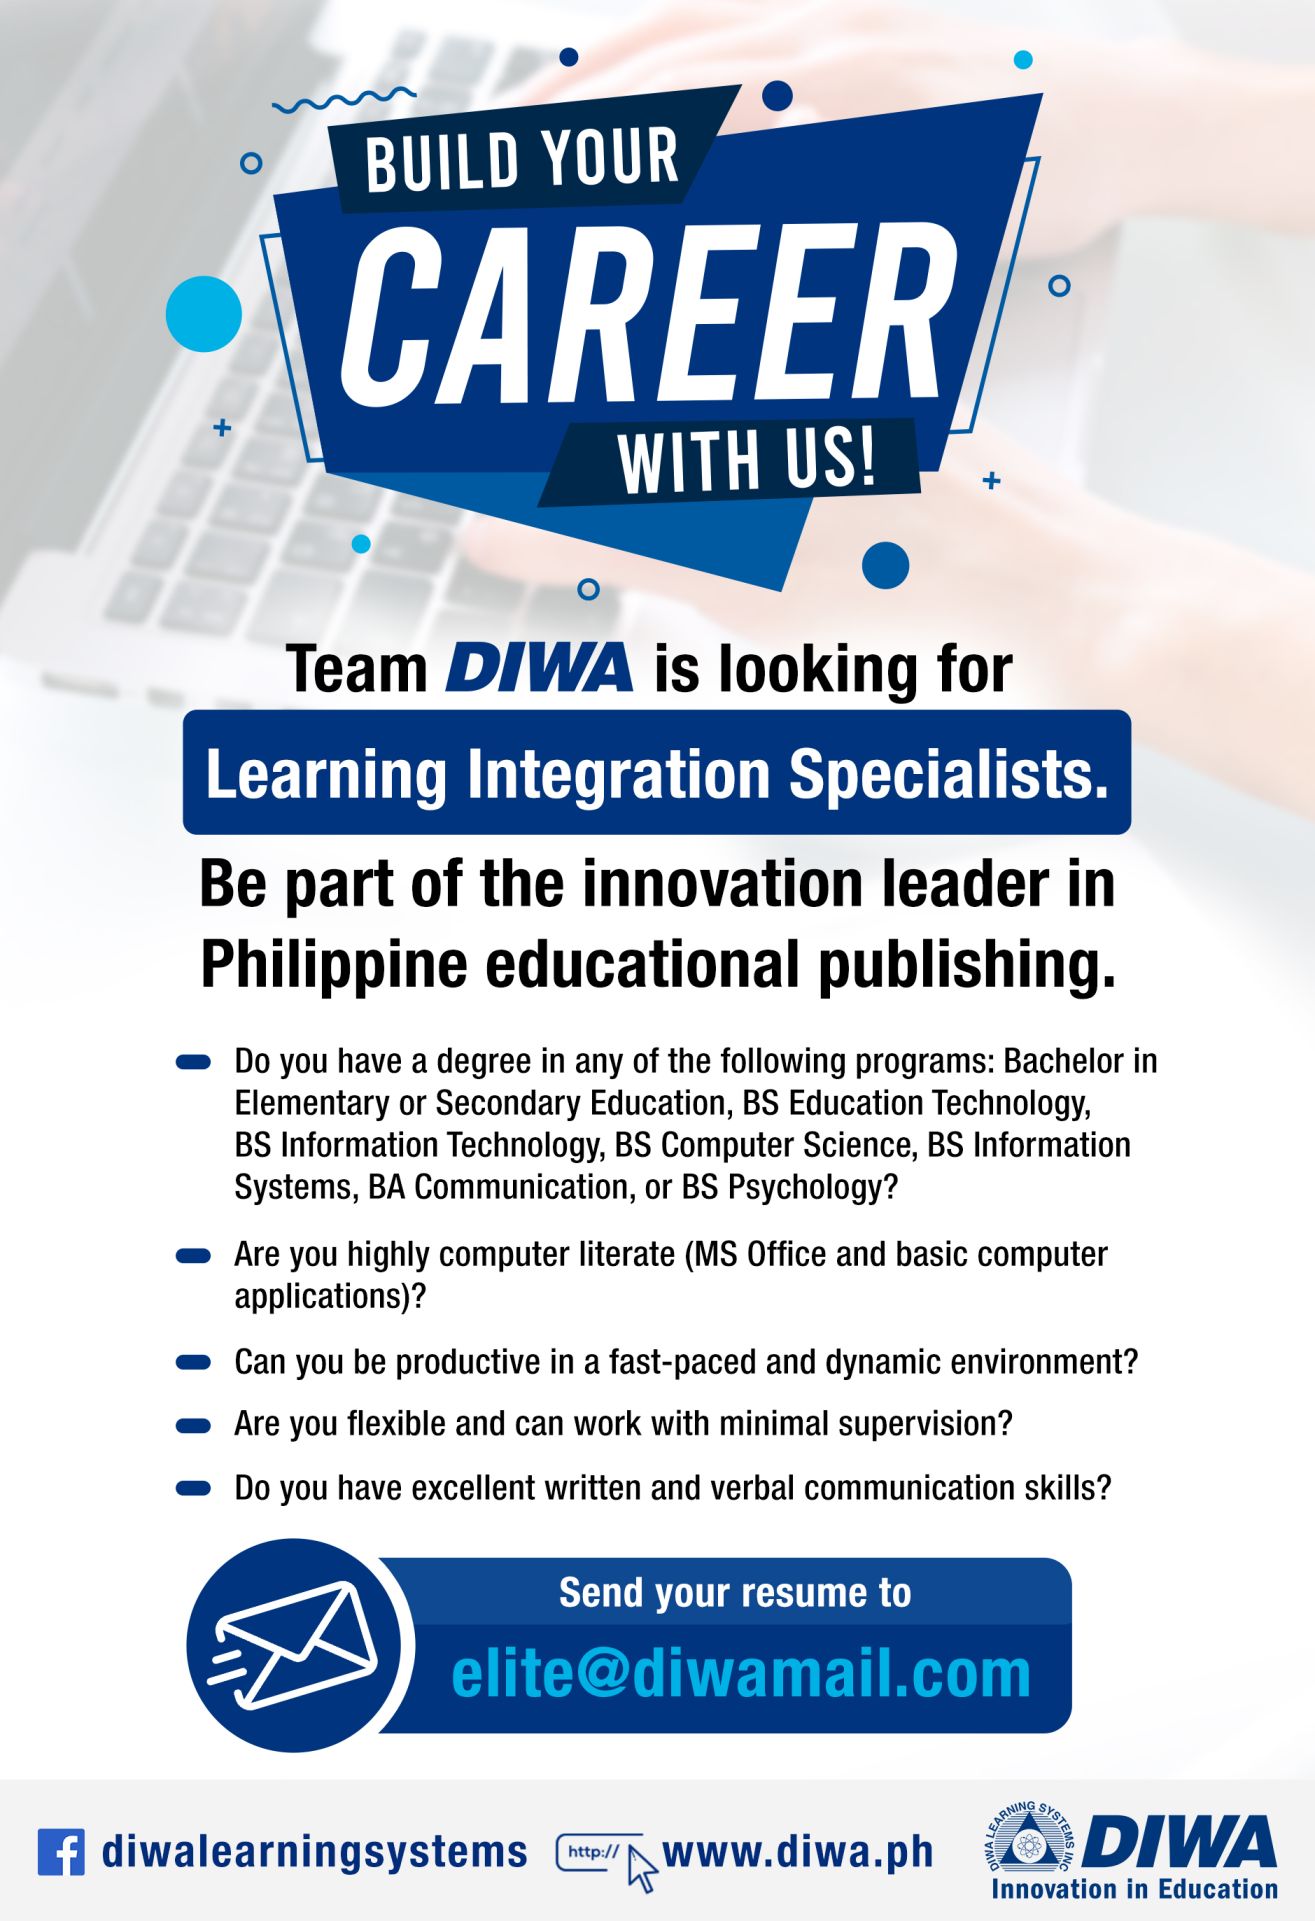 PLM alumni are welcome to apply as Learning Integration Specialists